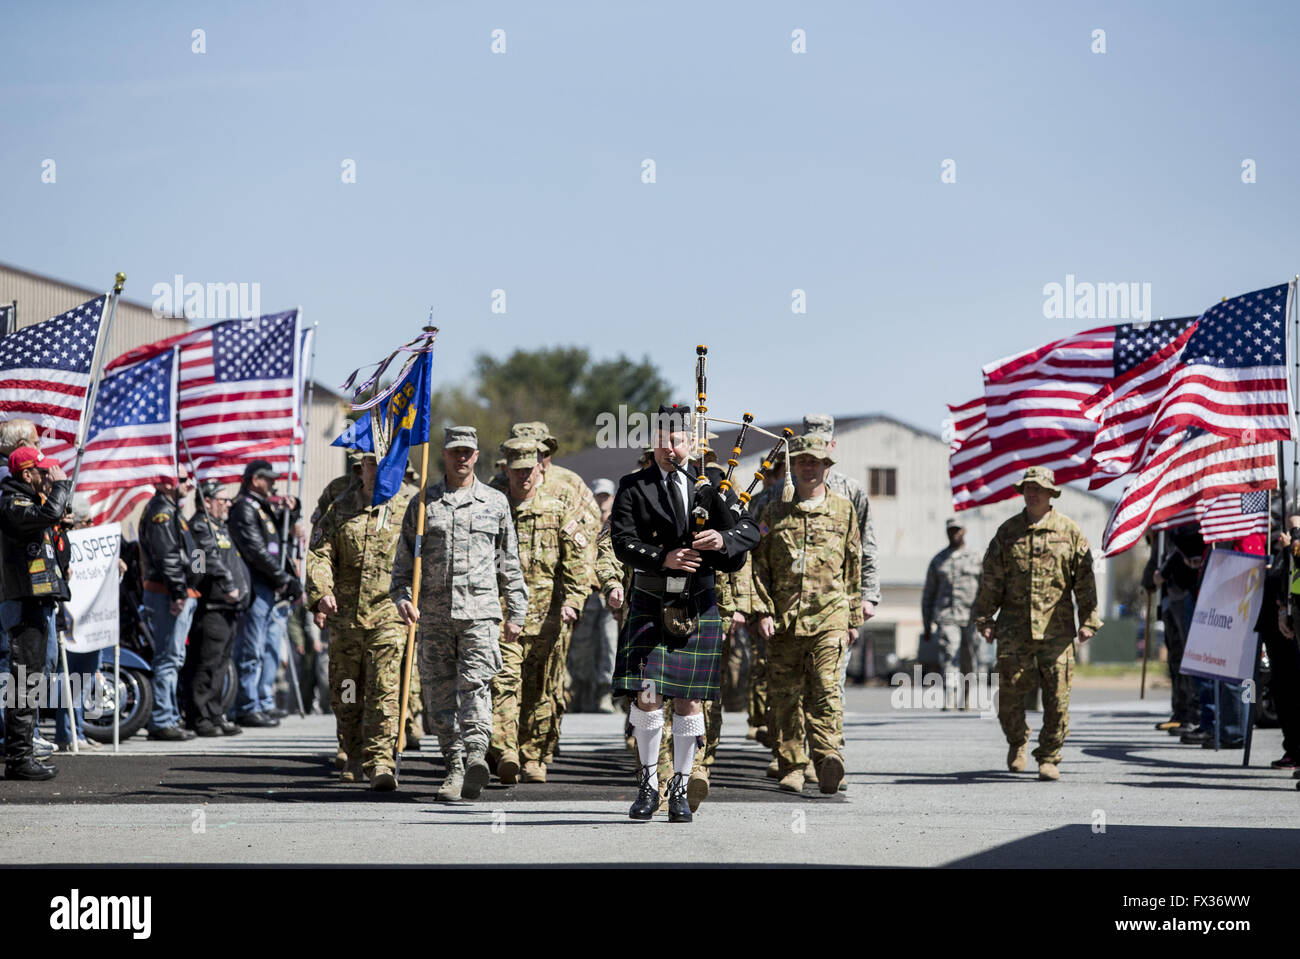 New Castle, Delaware, USA. 10th Apr, 2016. Members of the Delaware Air National Guard's 166th Airlift Wing march into a hangar at the air guard base for a homecoming and departure ceremony on Sunday afternoon. © ©/ZUMA Wire/Alamy Live News Stock Photo